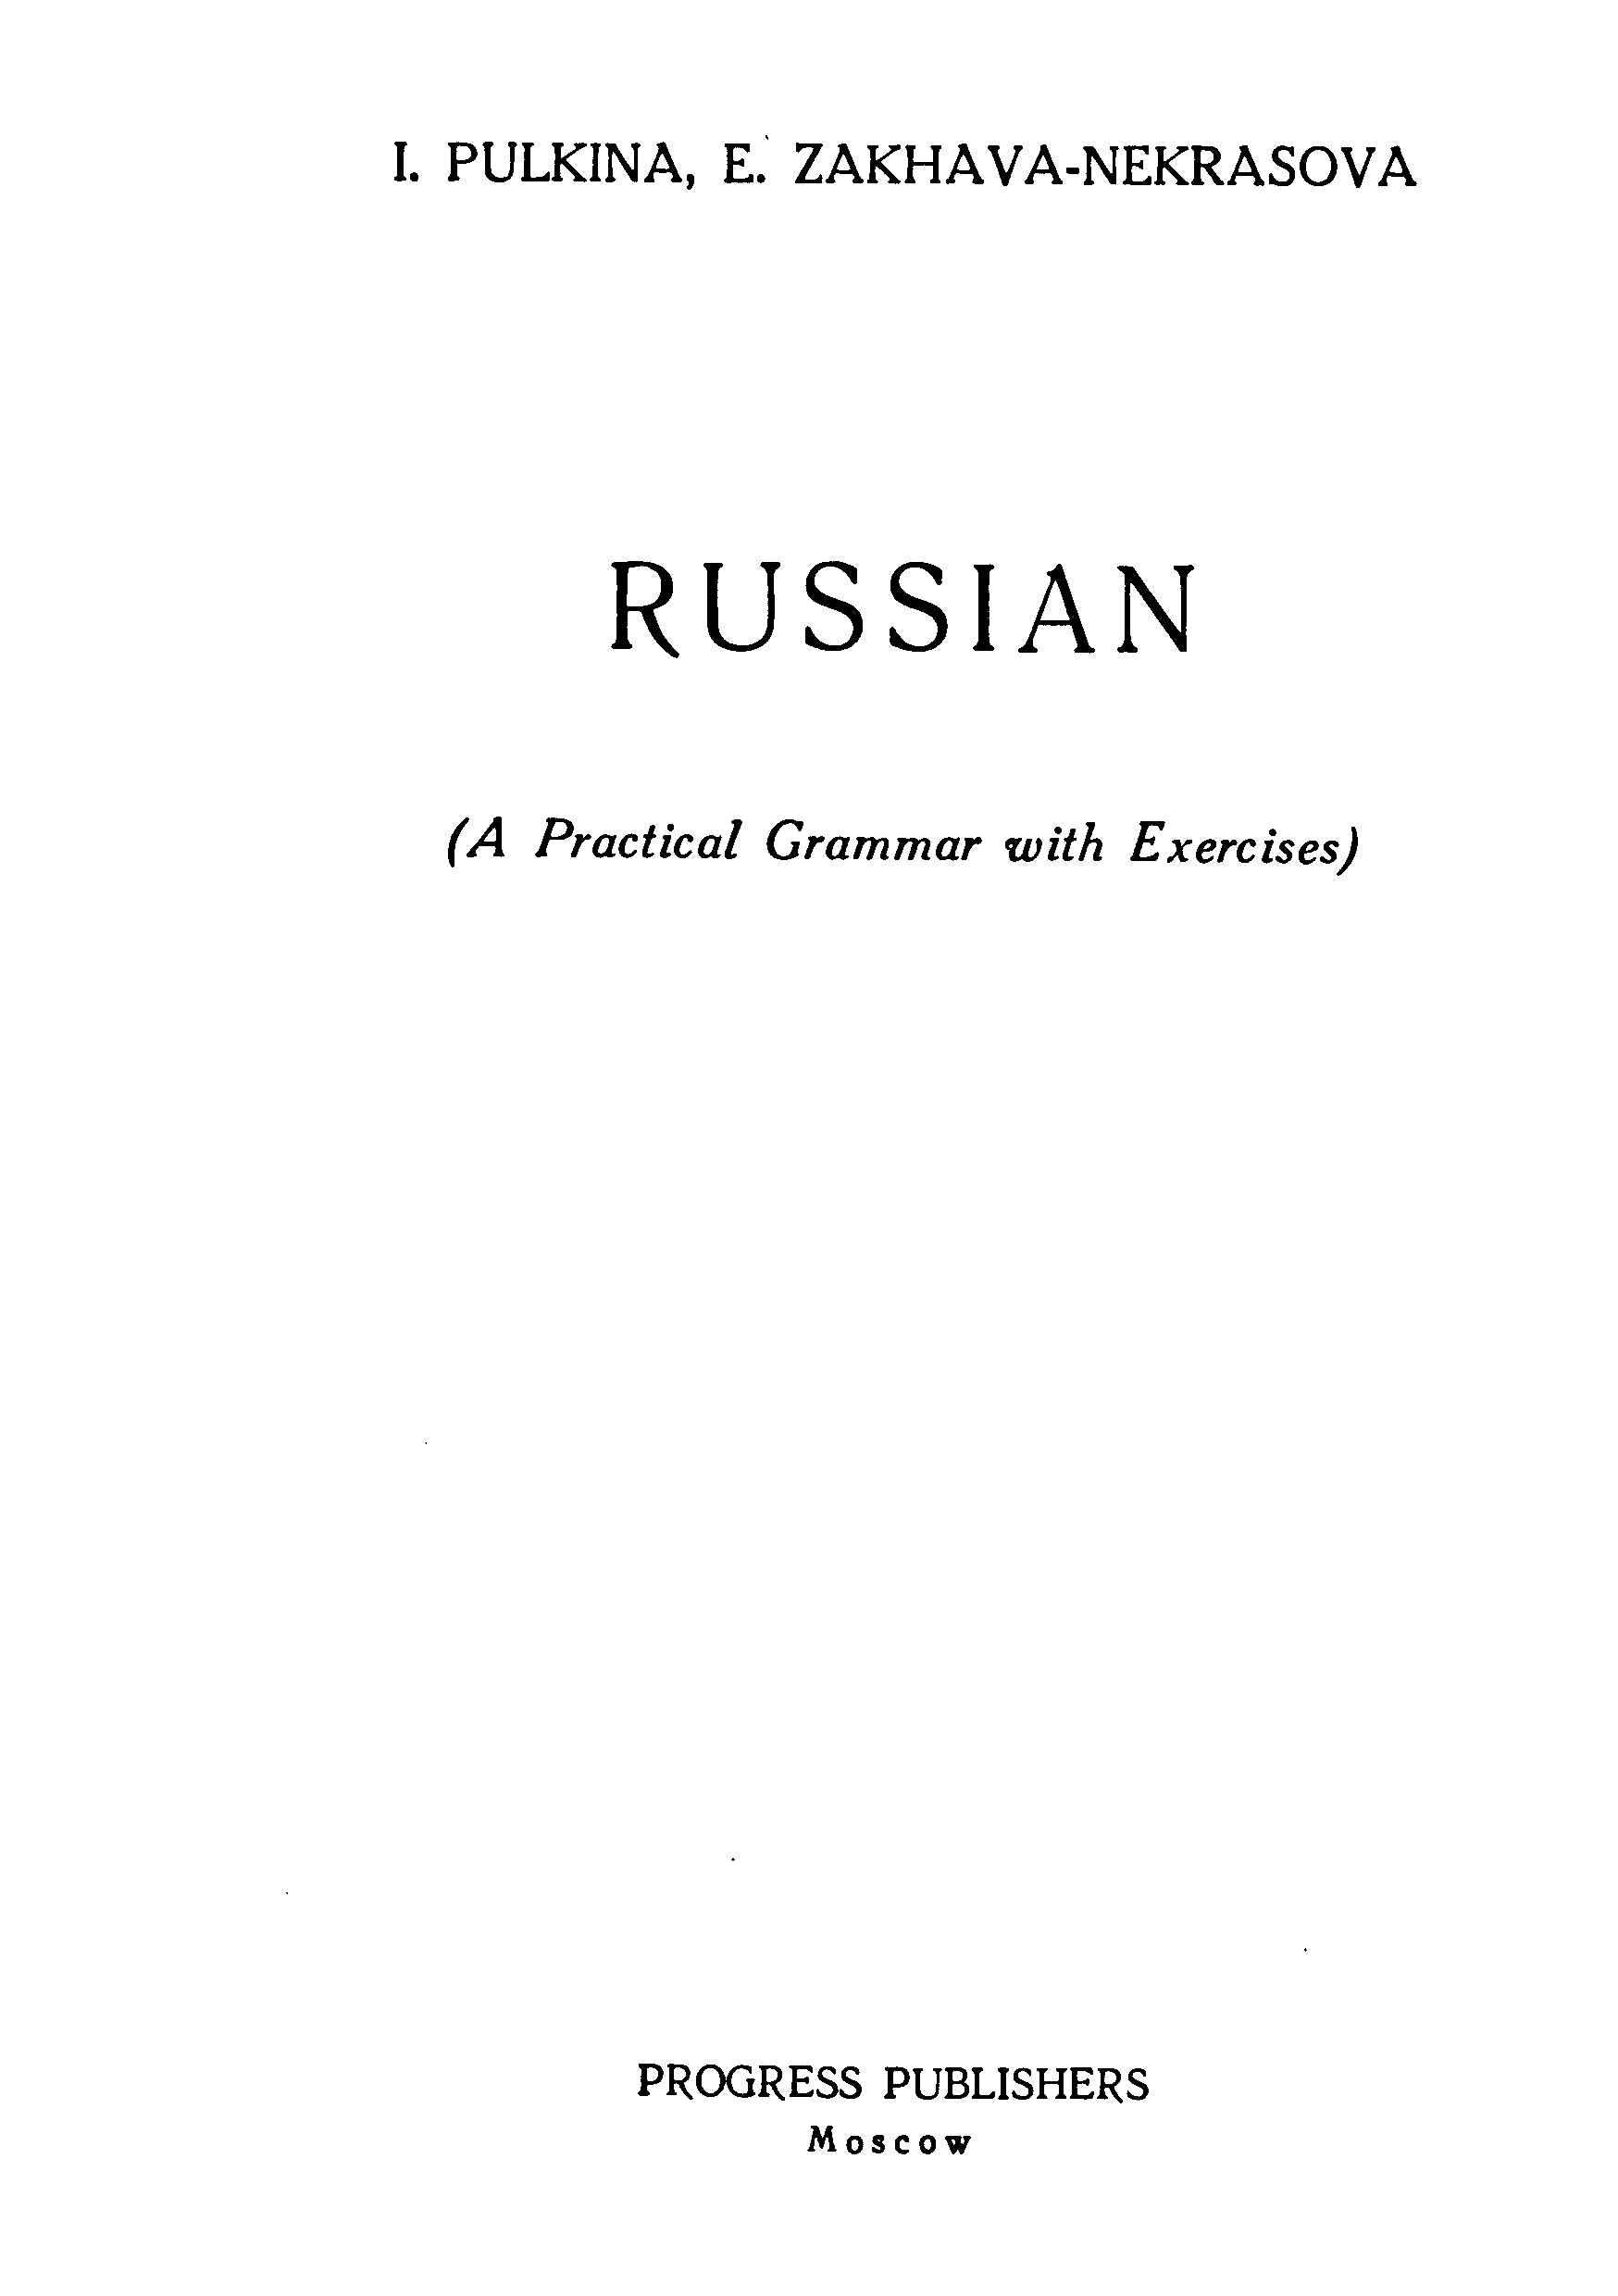 Russian (a pratical grammar with exercises) 